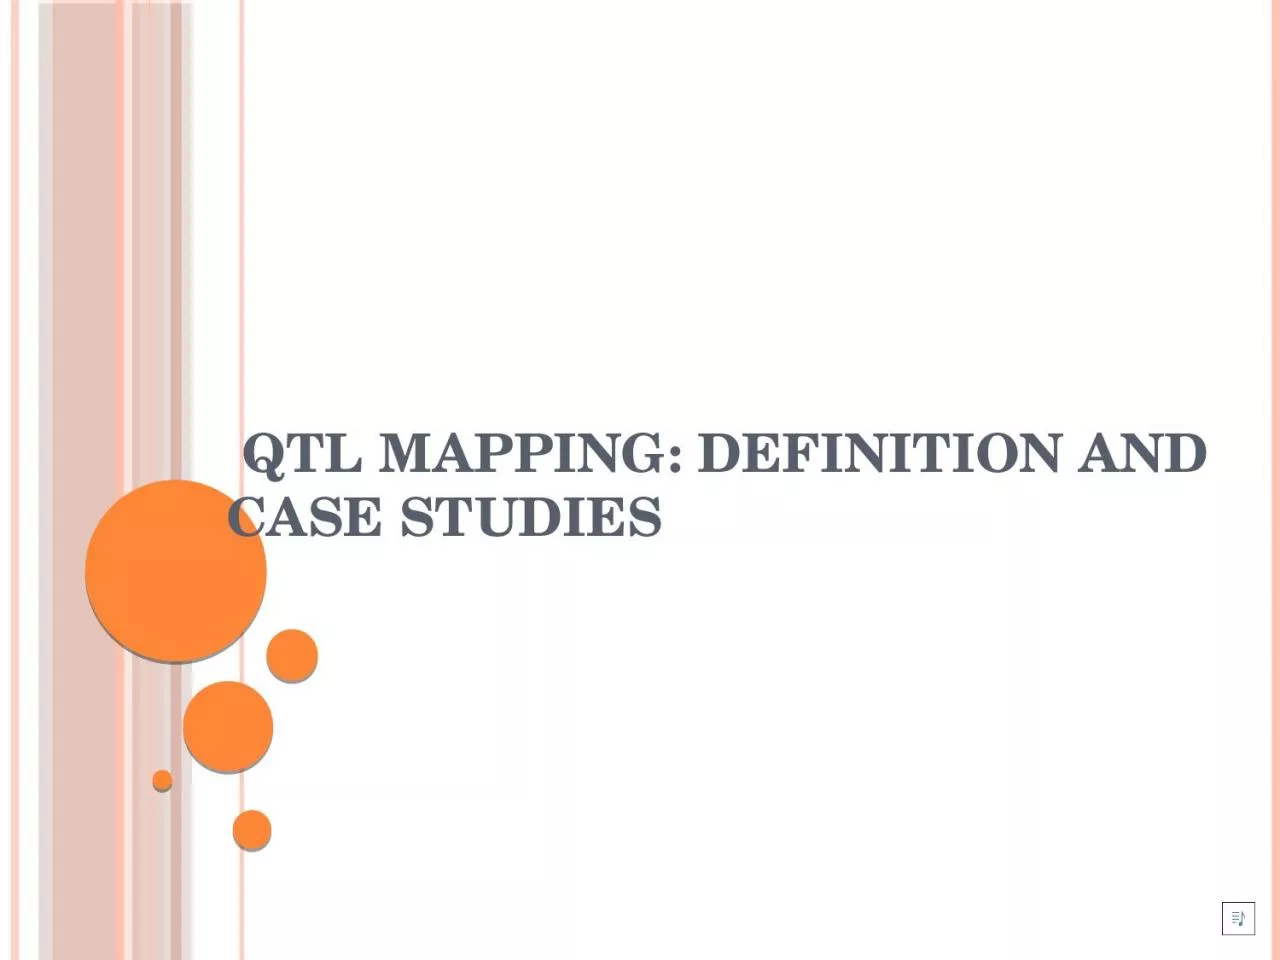 QTL mapping: Definition and case studies